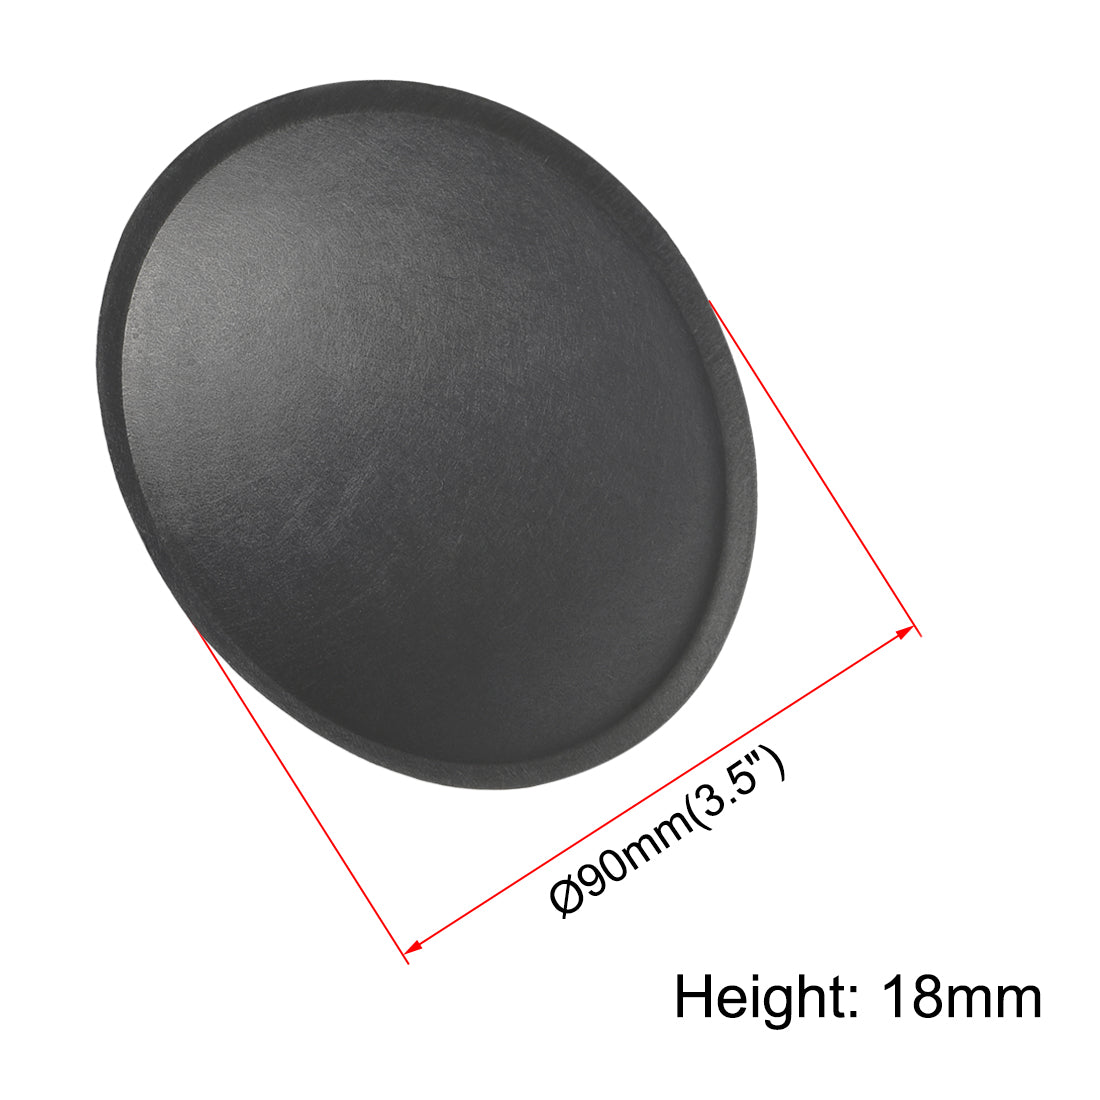 uxcell Uxcell Speaker Dust Cap 90mm/3.5" Diameter Subwoofer Paper Dome Coil Cover Caps